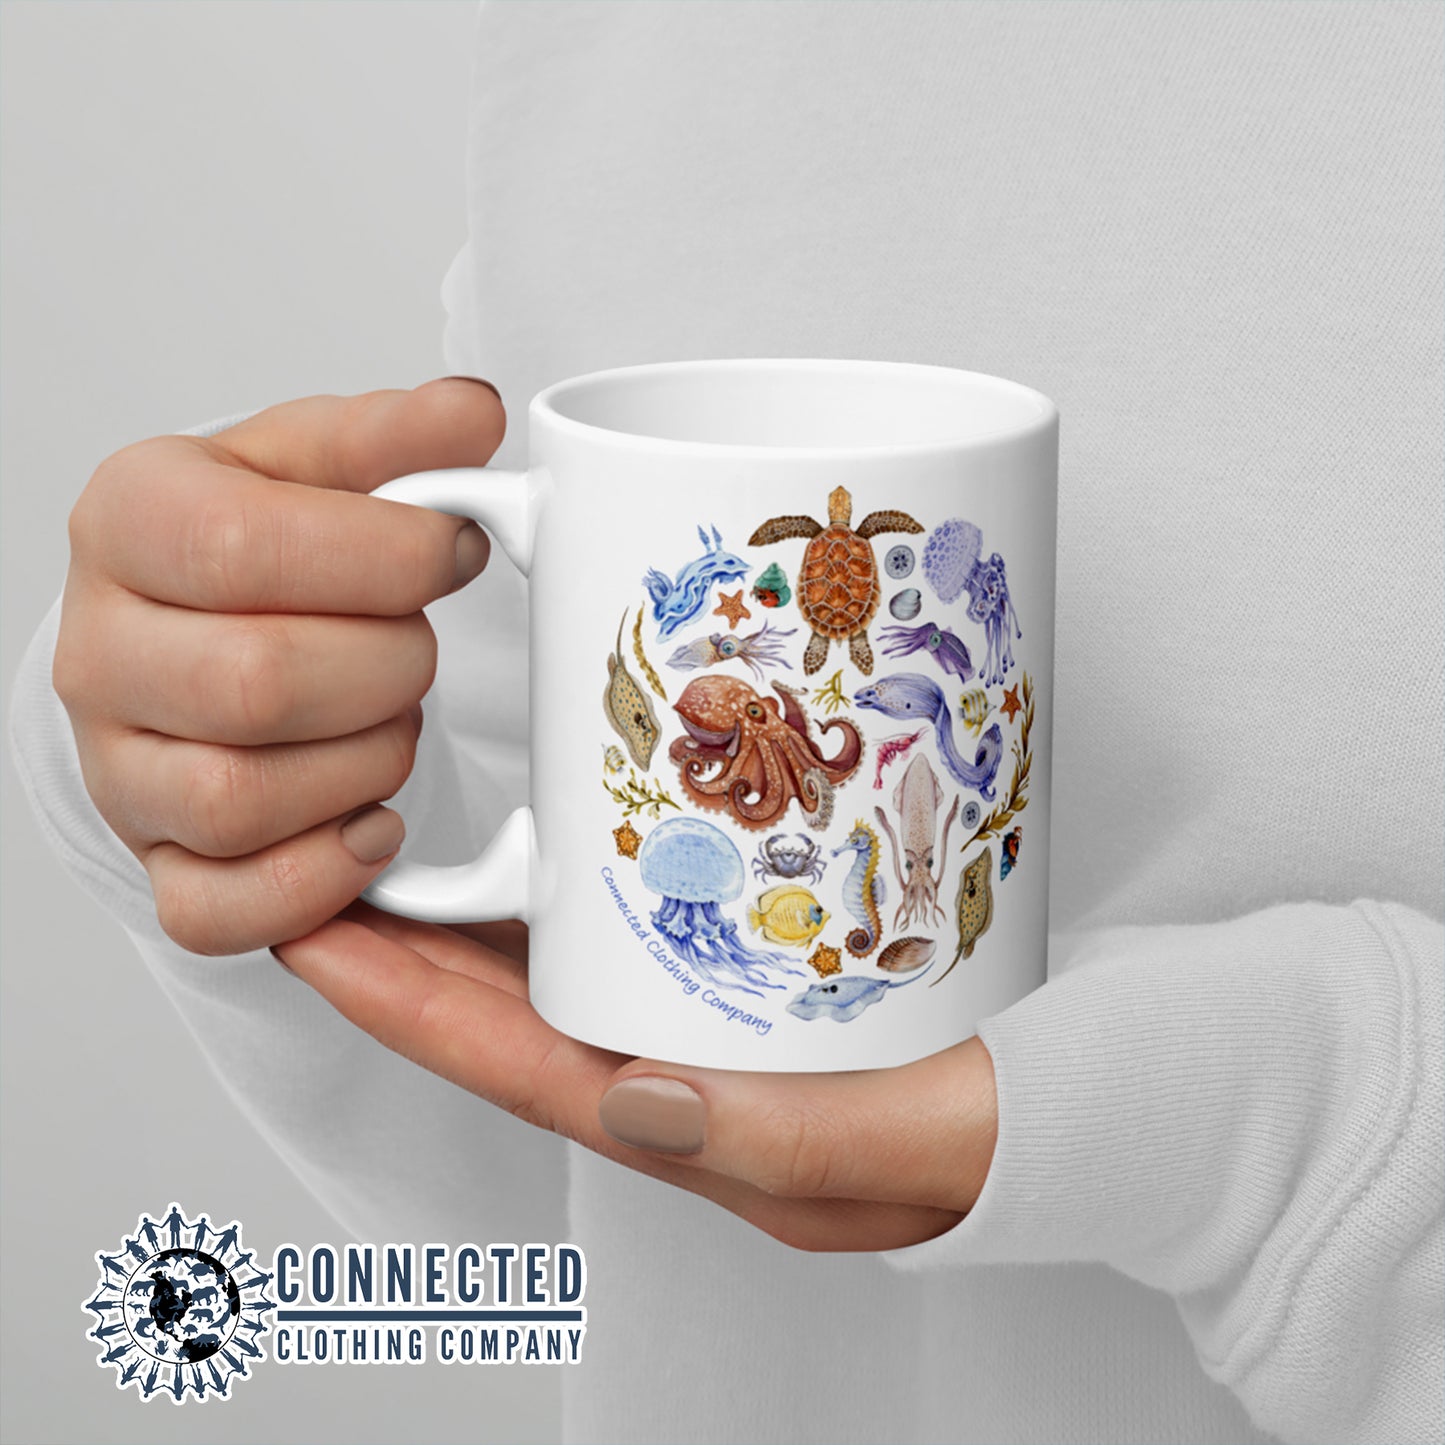 Ocean Sea Creature Classic Mug - Connected Clothing Company - Ethical and Sustainable Clothing That Gives Back - 10% donated to Mission Blue ocean conservation